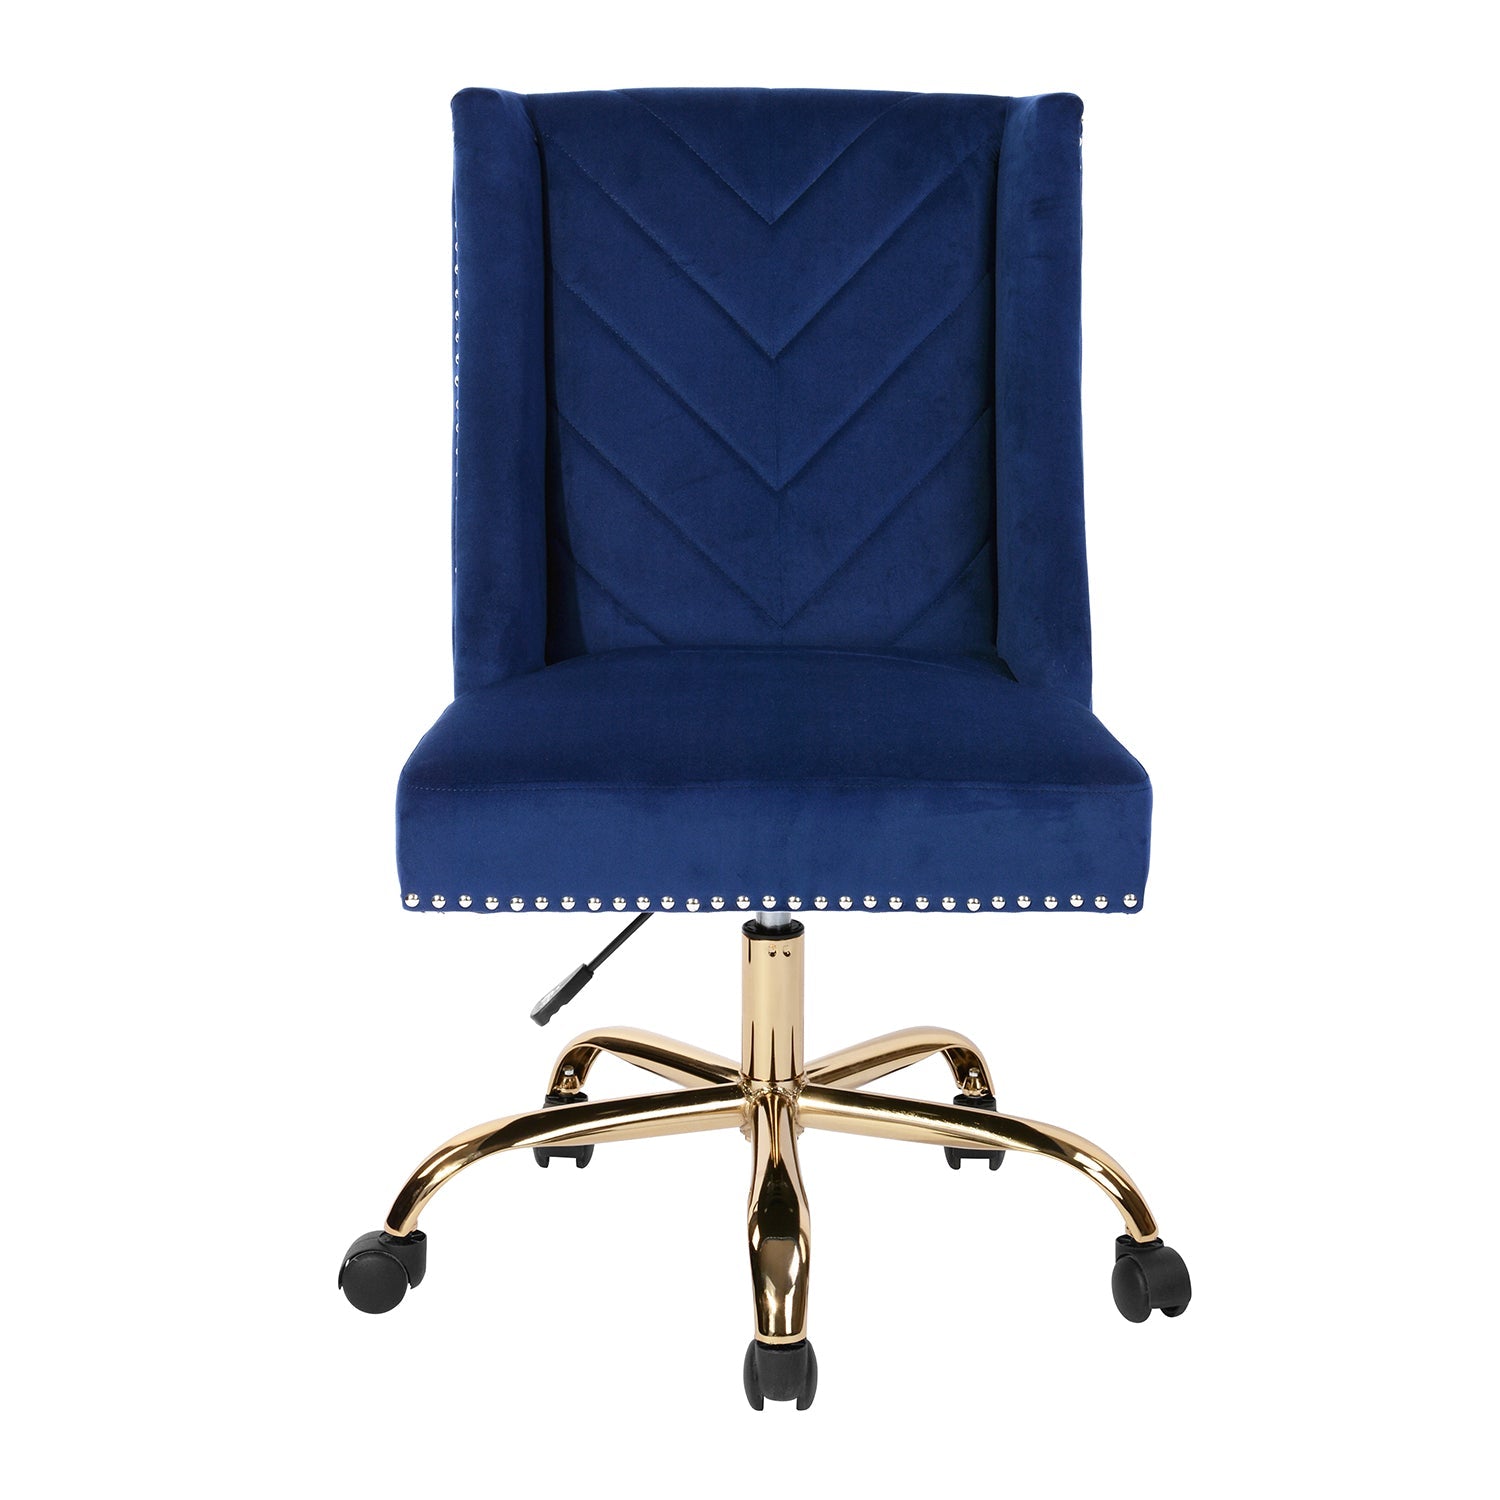 Tronco Fabric Office Chair